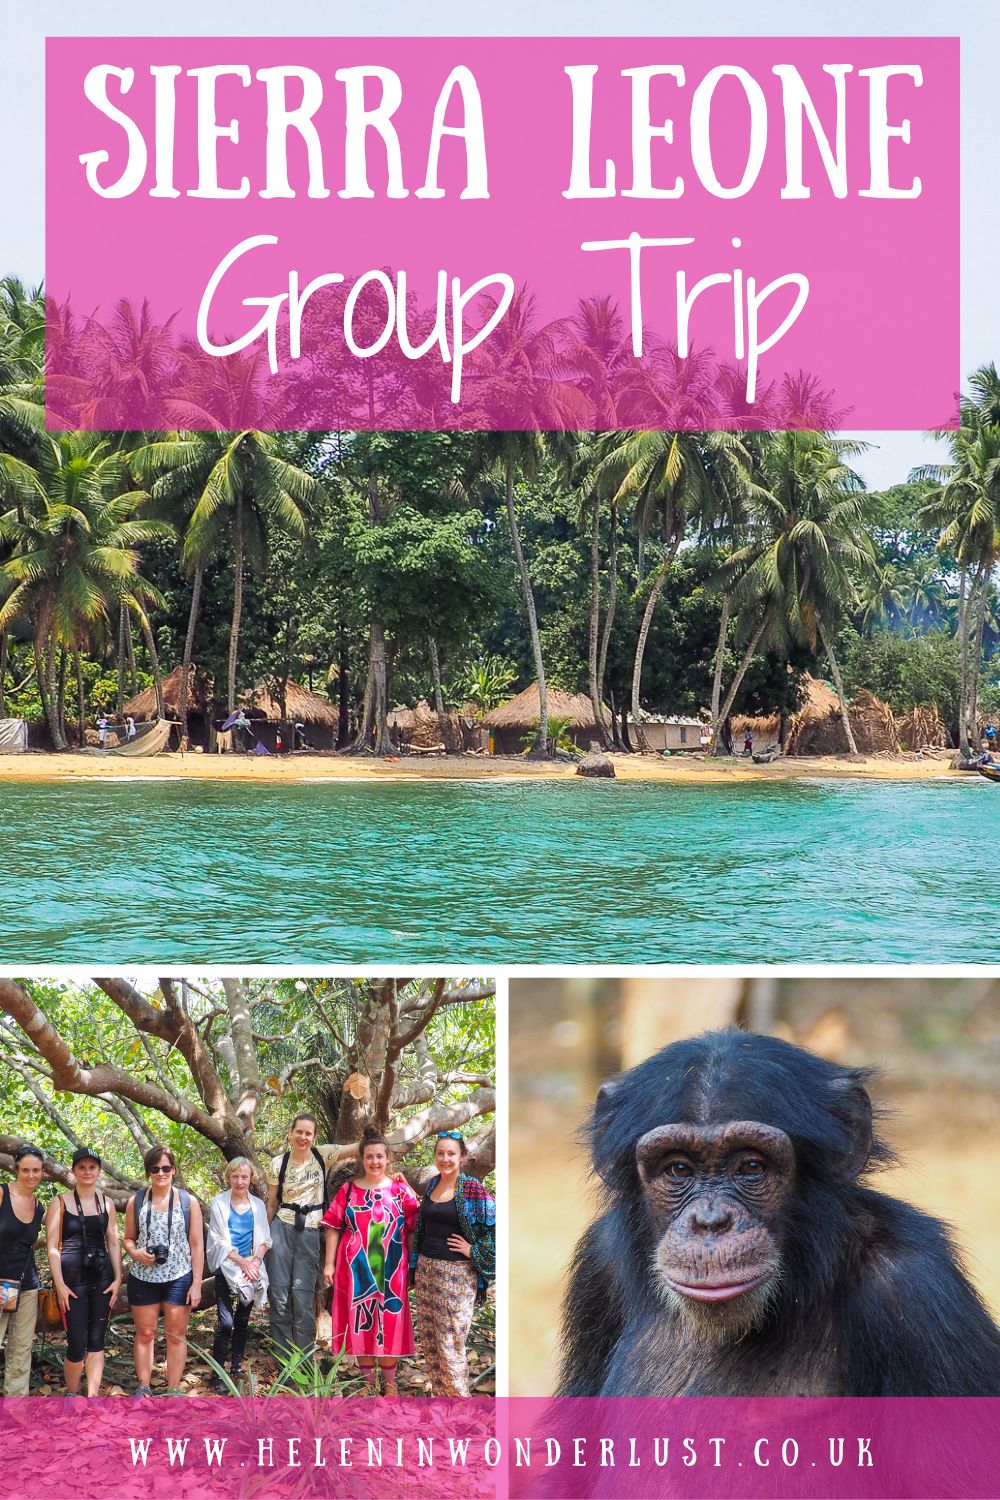 Join me on an incredible group trip adventure in Sierra Leone, an amazing and fascinating but very misunderstood country.